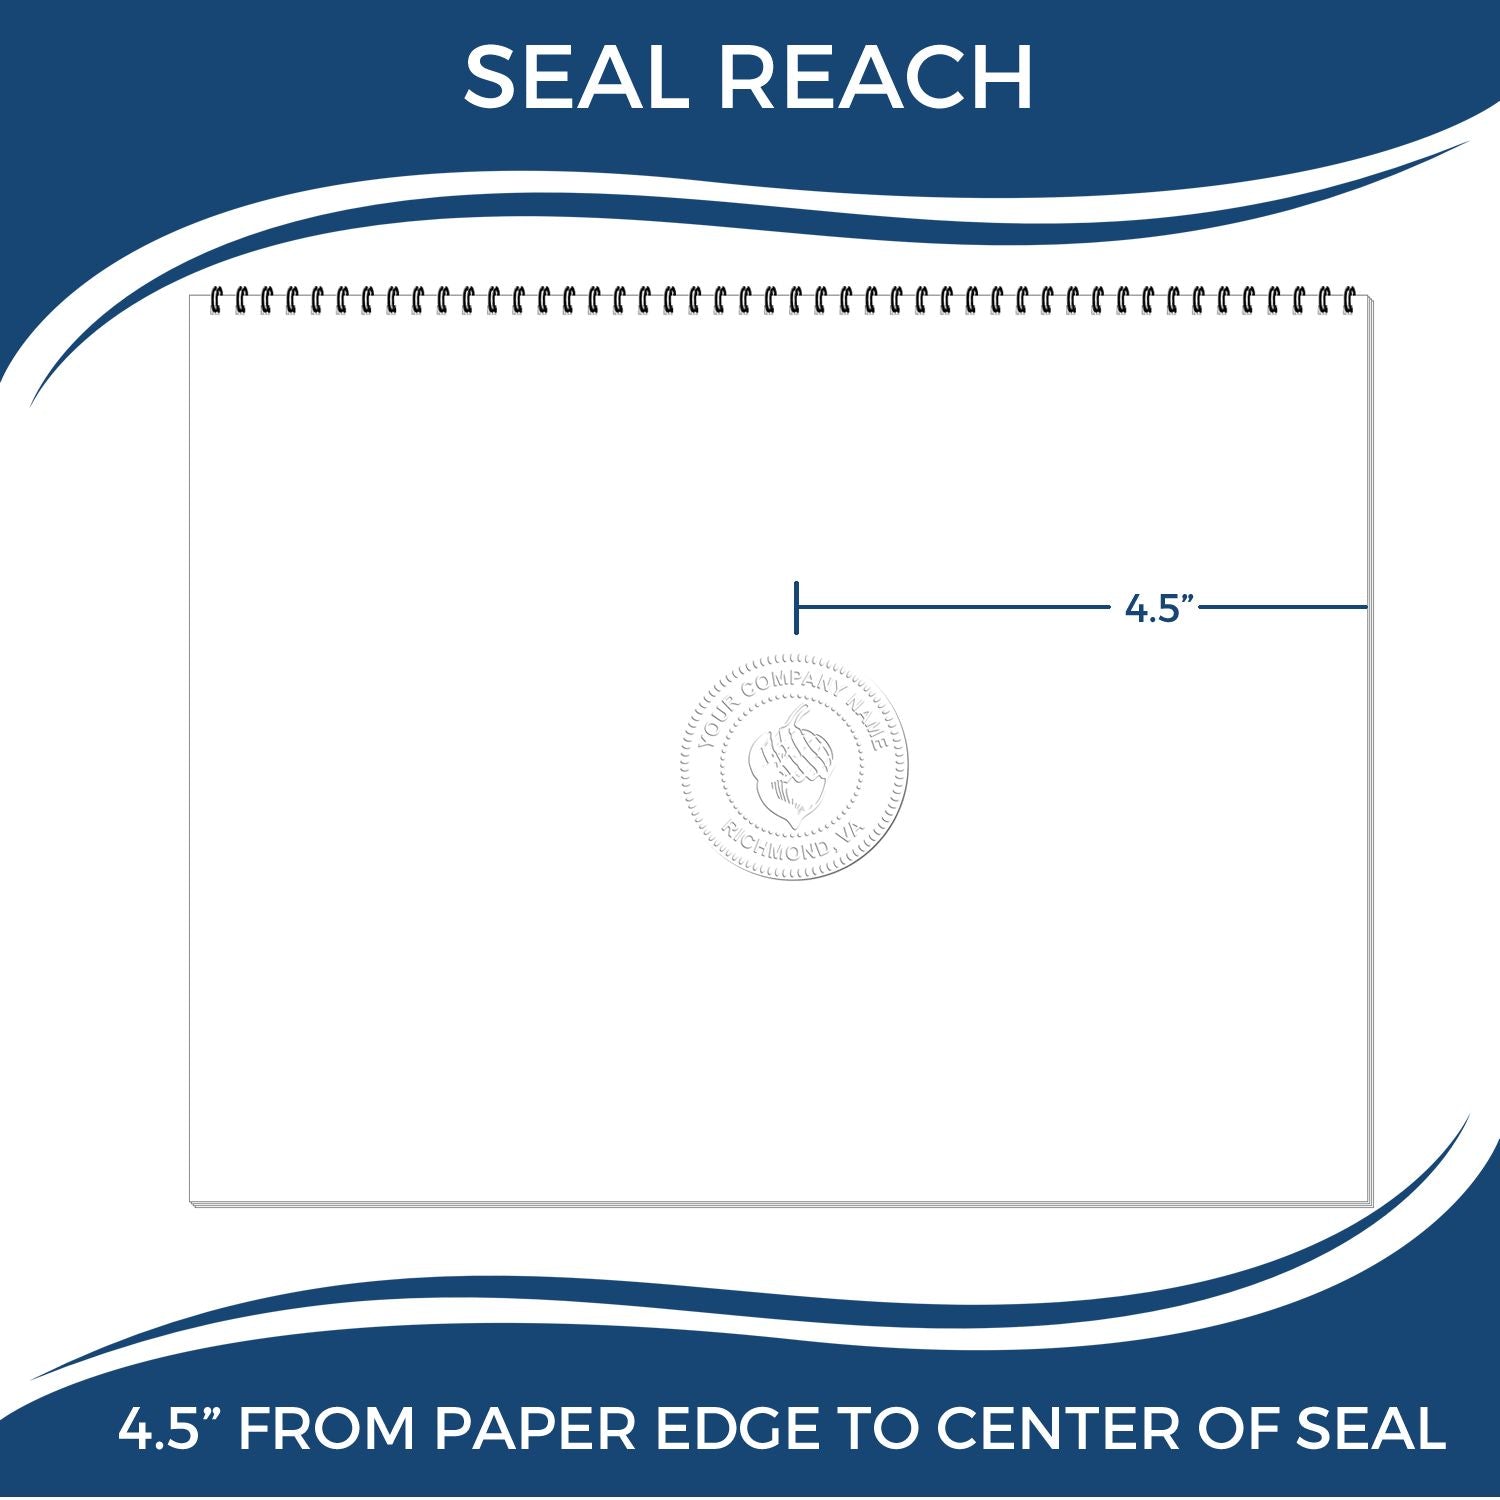 An infographic showing the seal reach which is represented by a ruler and a miniature seal image of the State of Oregon Extended Long Reach Engineer Seal